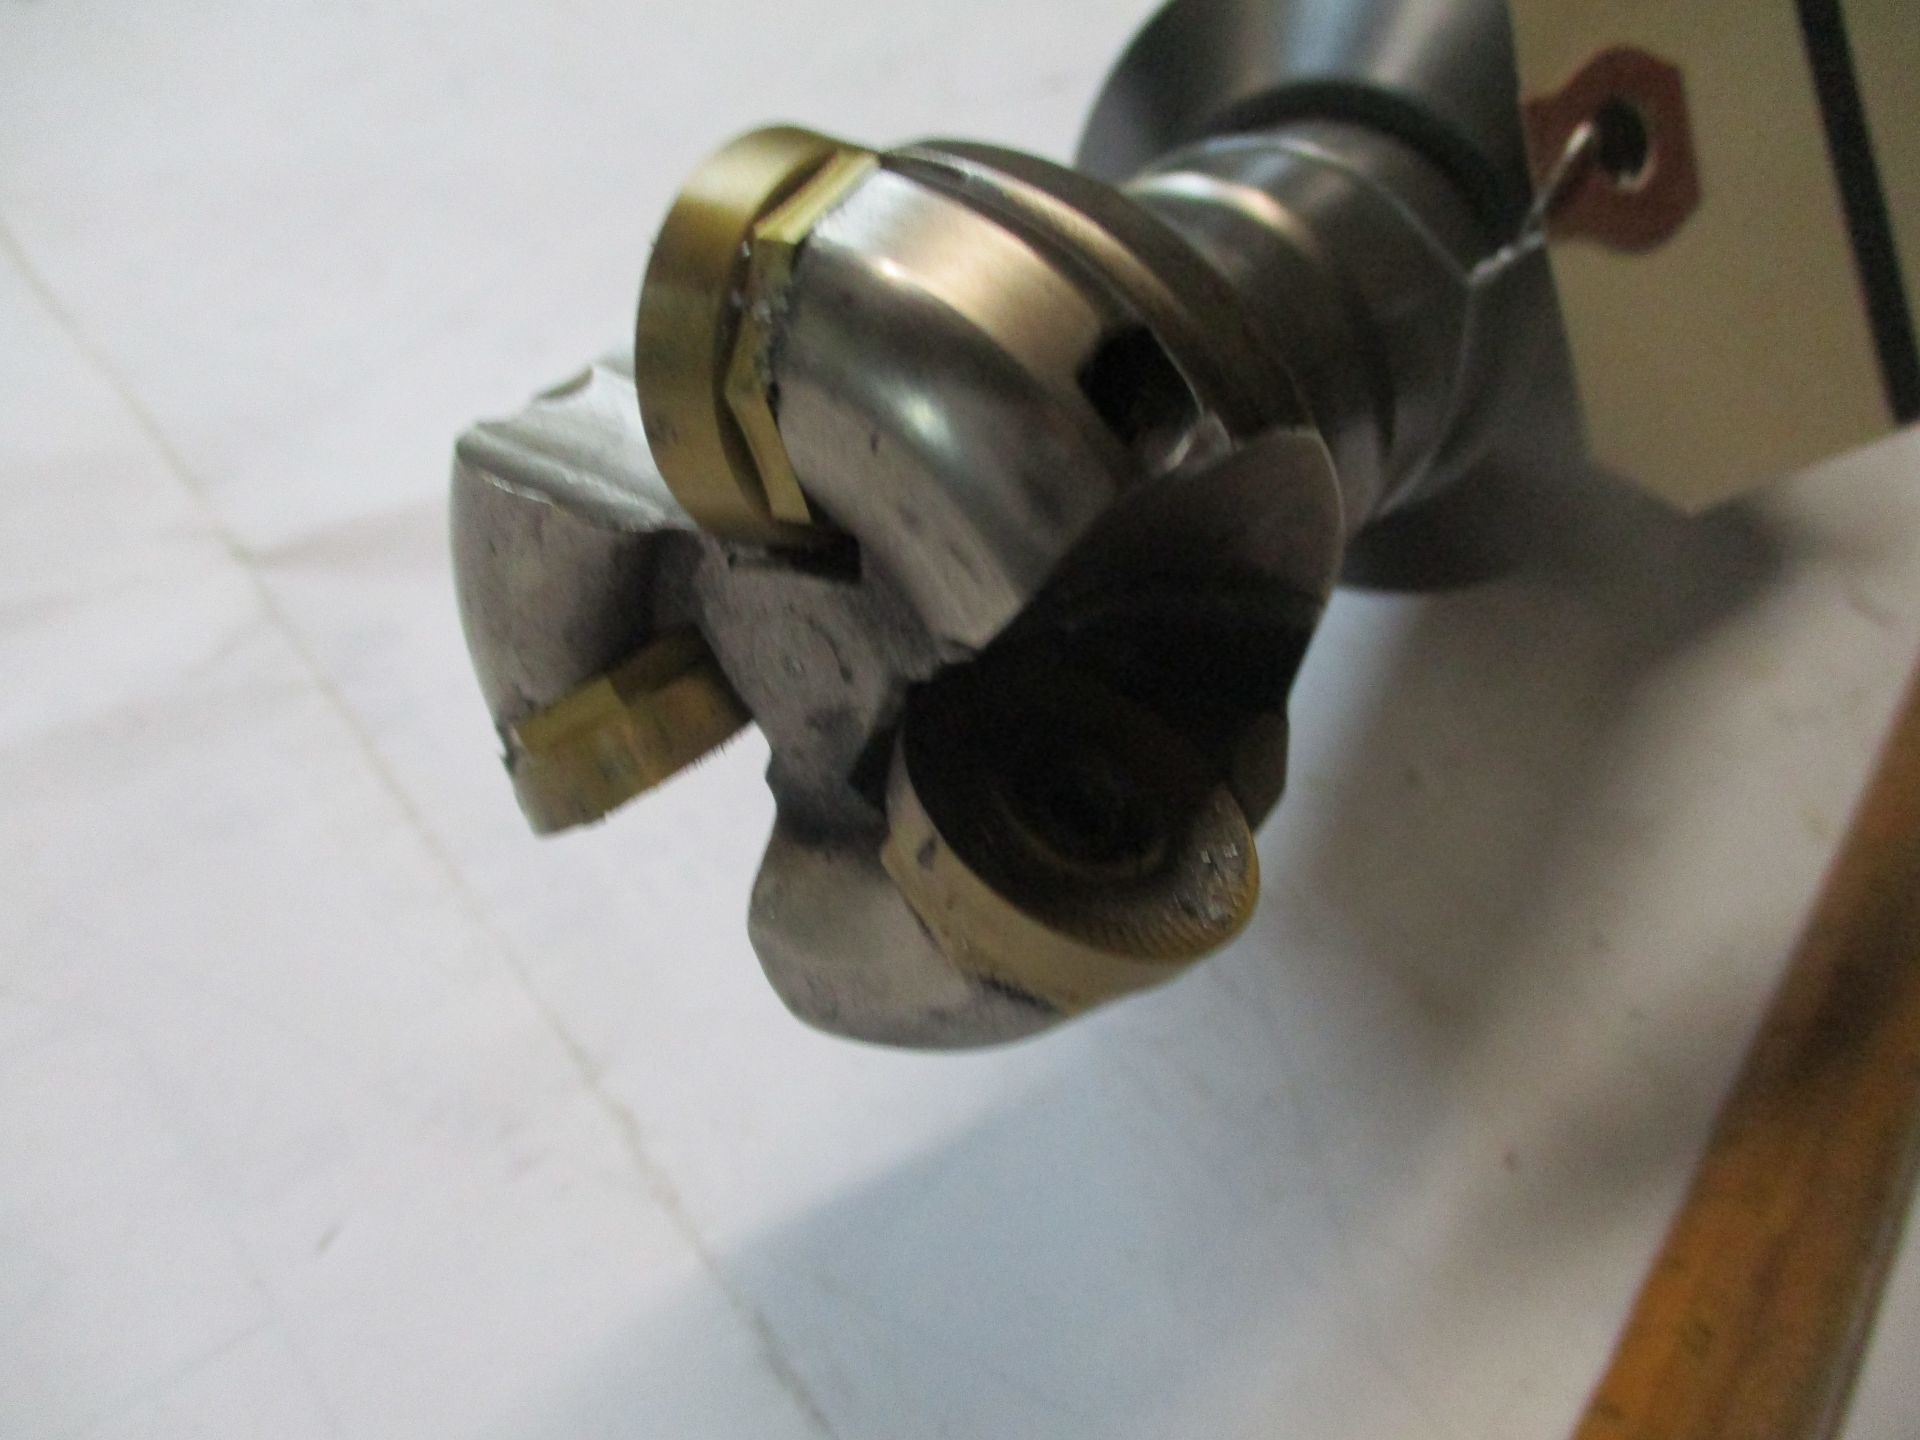 Taper 50 Solid Holder with Radius Insert Tool - Image 2 of 2